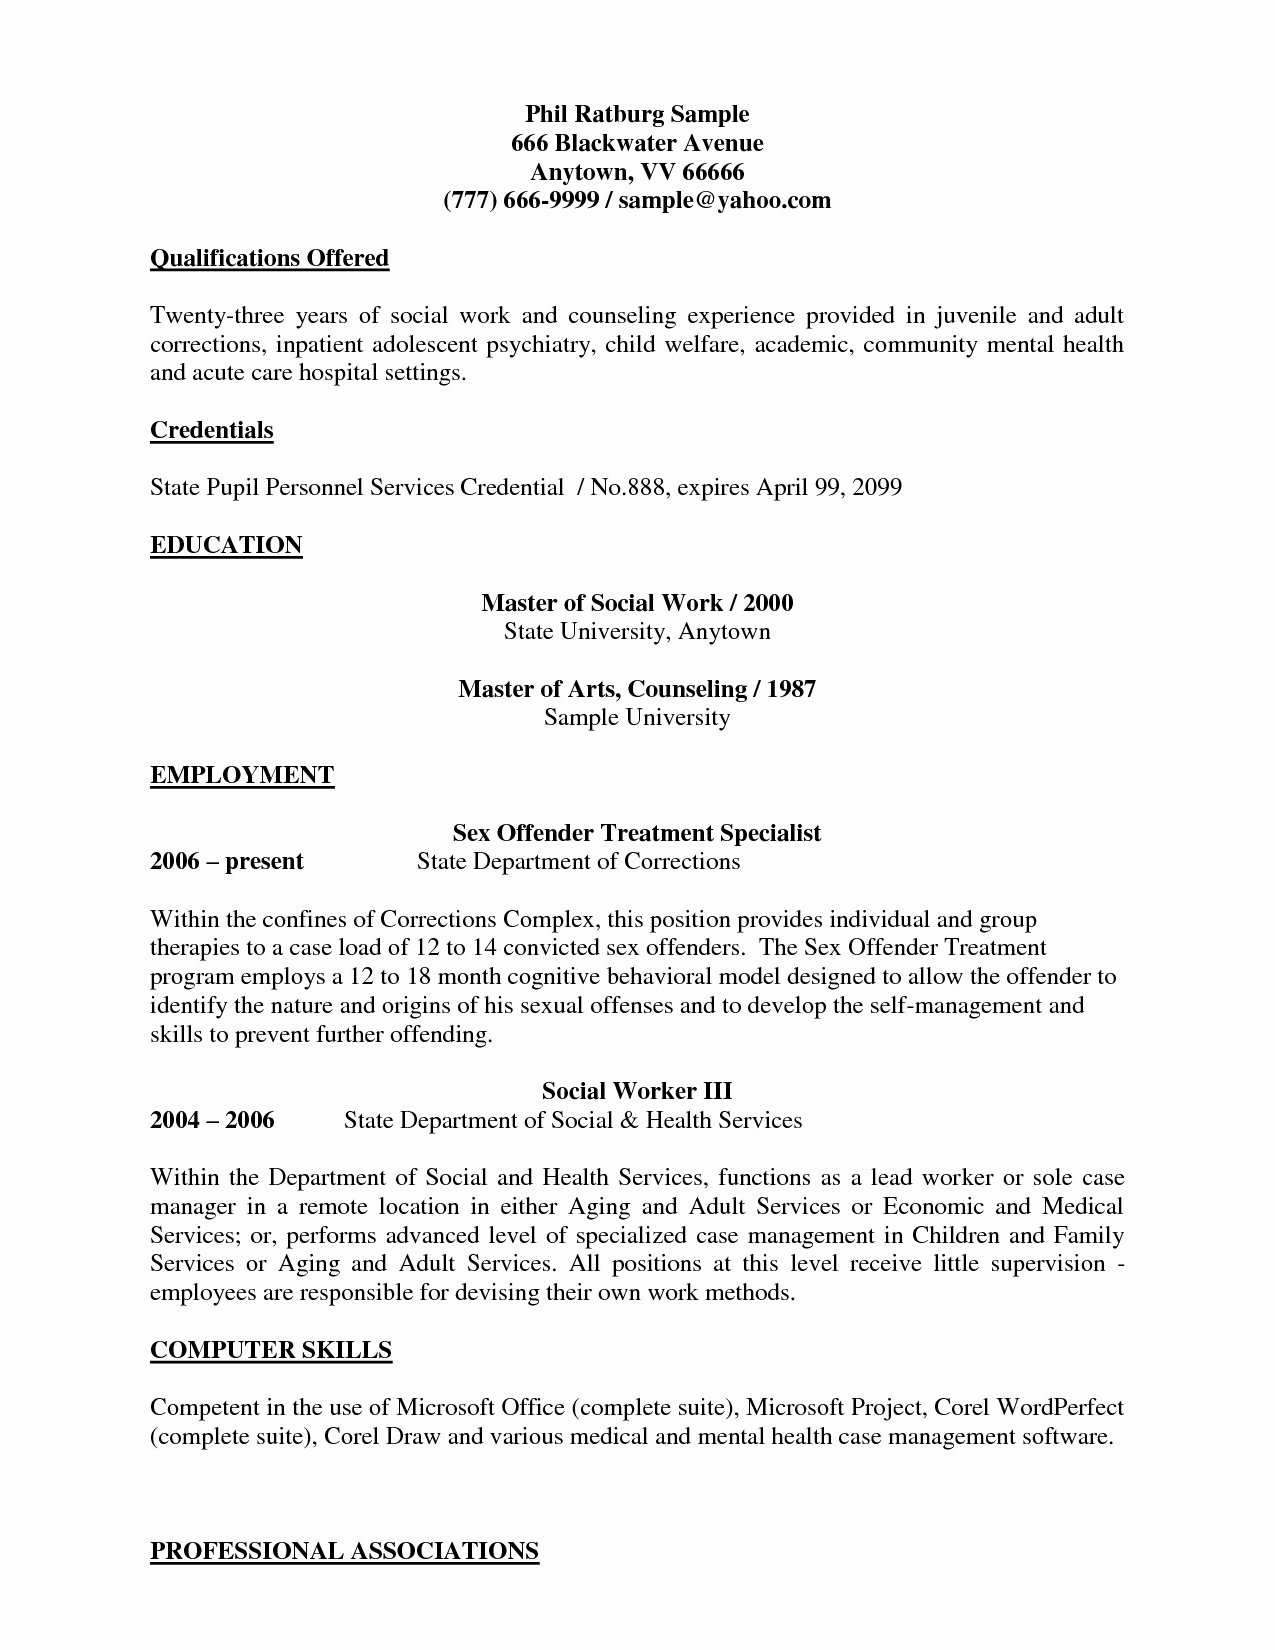 Resume for Human Services Worker Resume Ideas